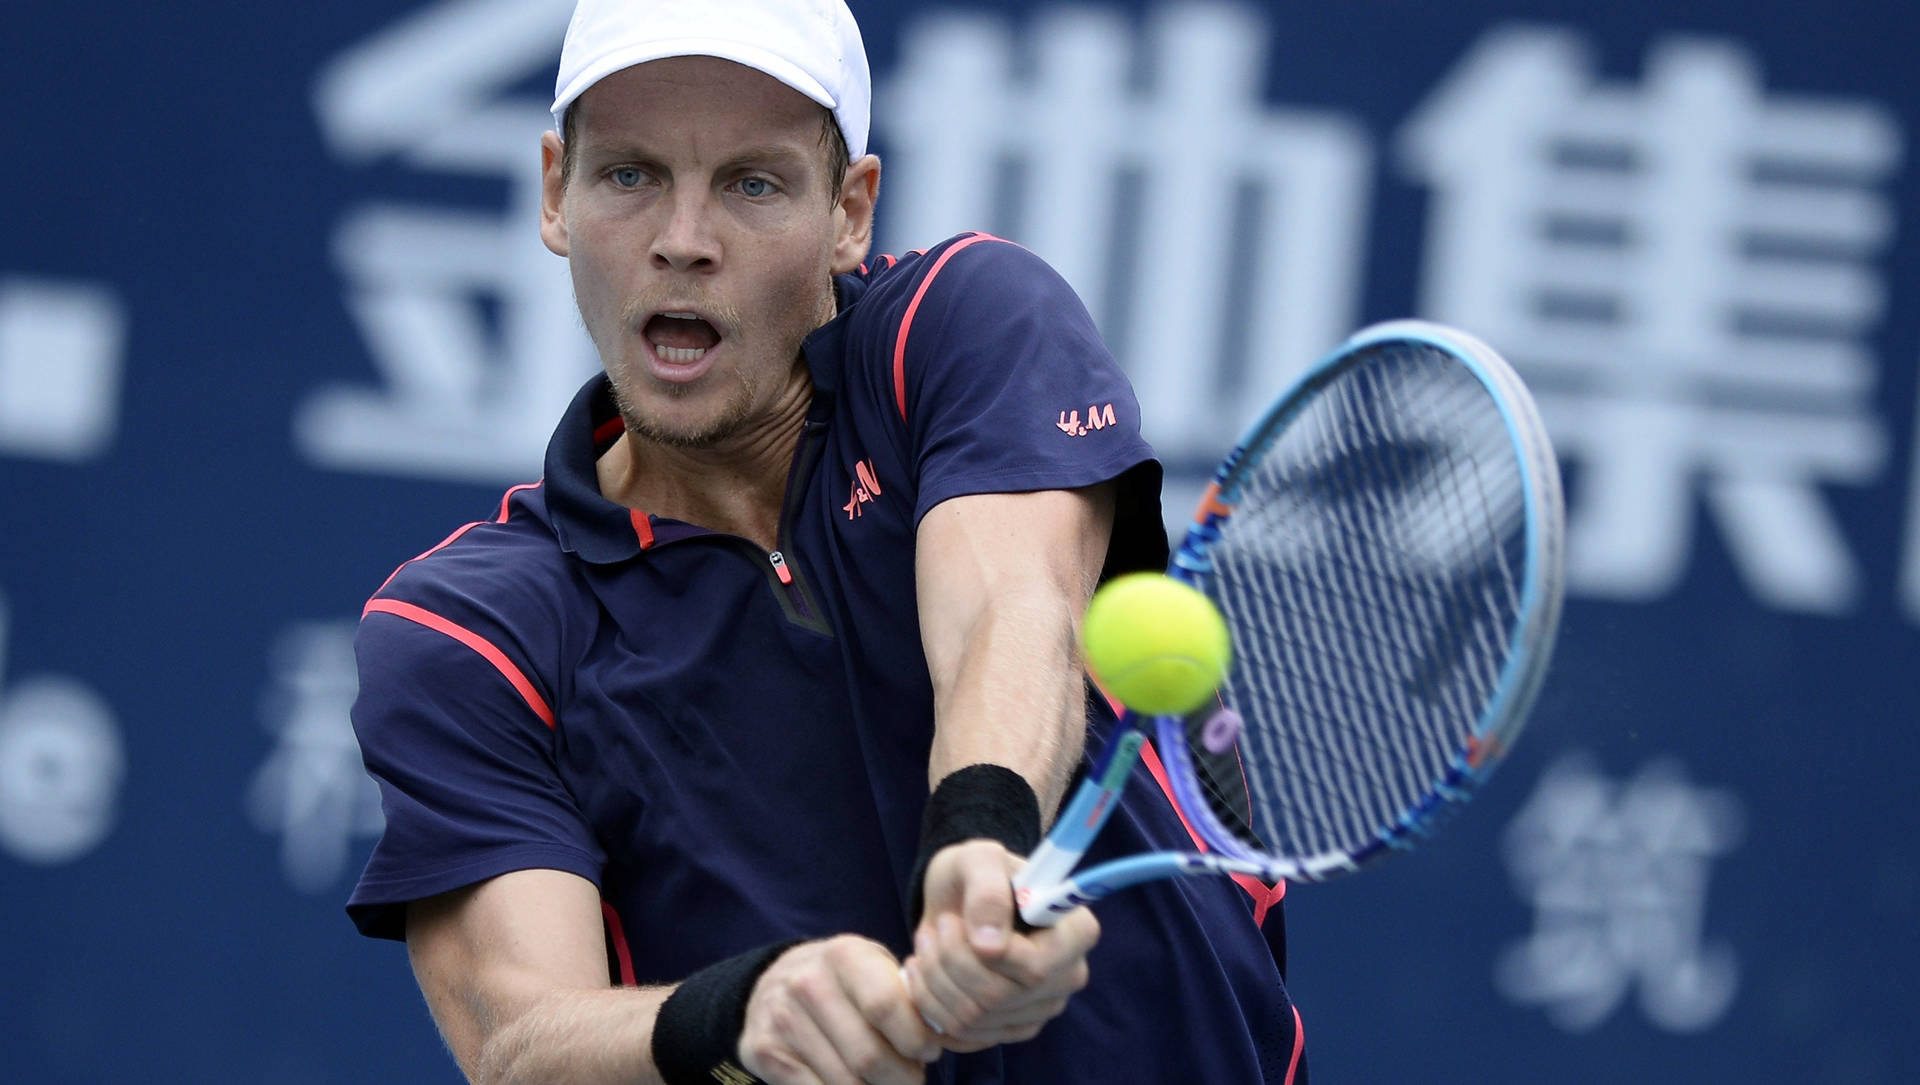 Tomas Berdych Swinging To Hit The Ball Wallpaper